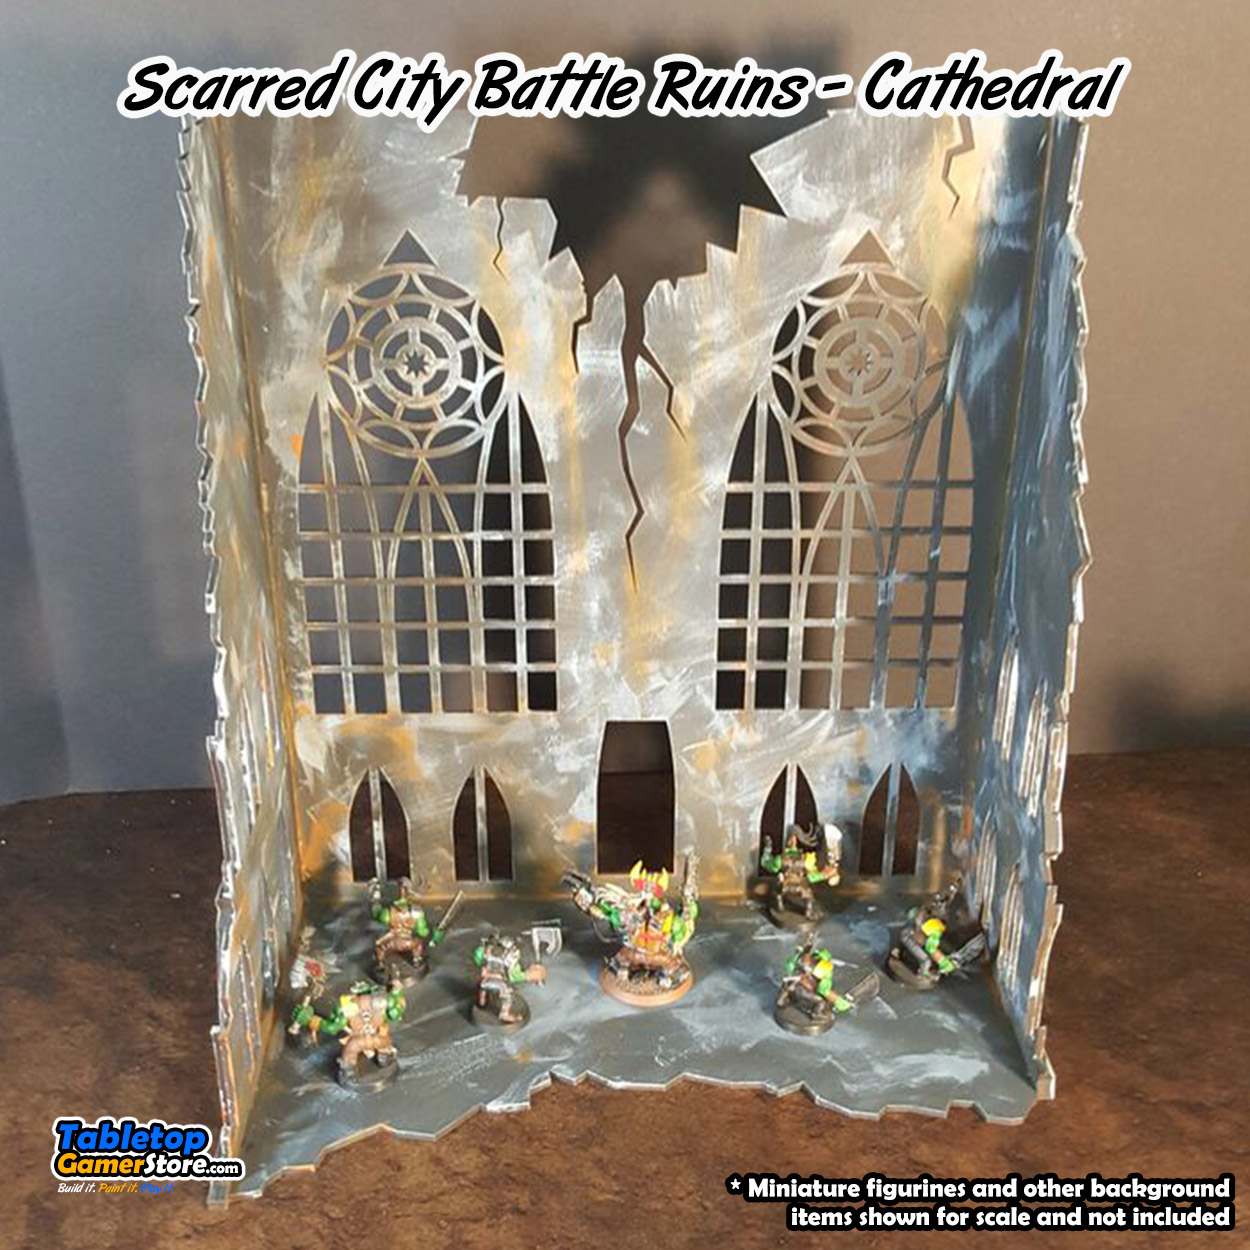 scarred_city_battle_ruins_cathedral_05